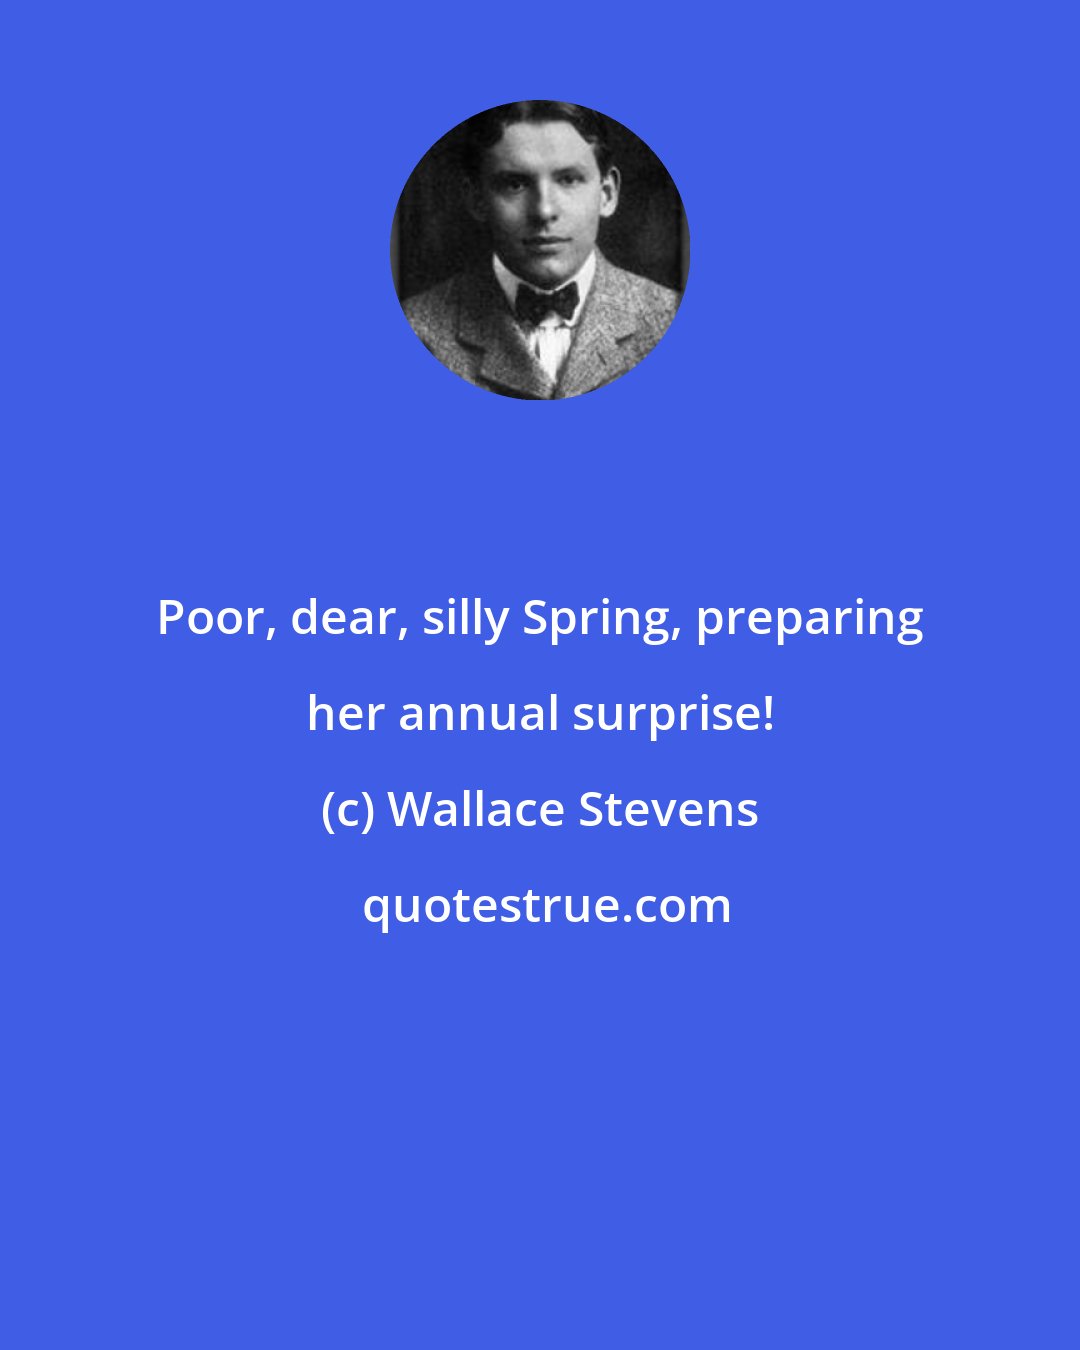 Wallace Stevens: Poor, dear, silly Spring, preparing her annual surprise!